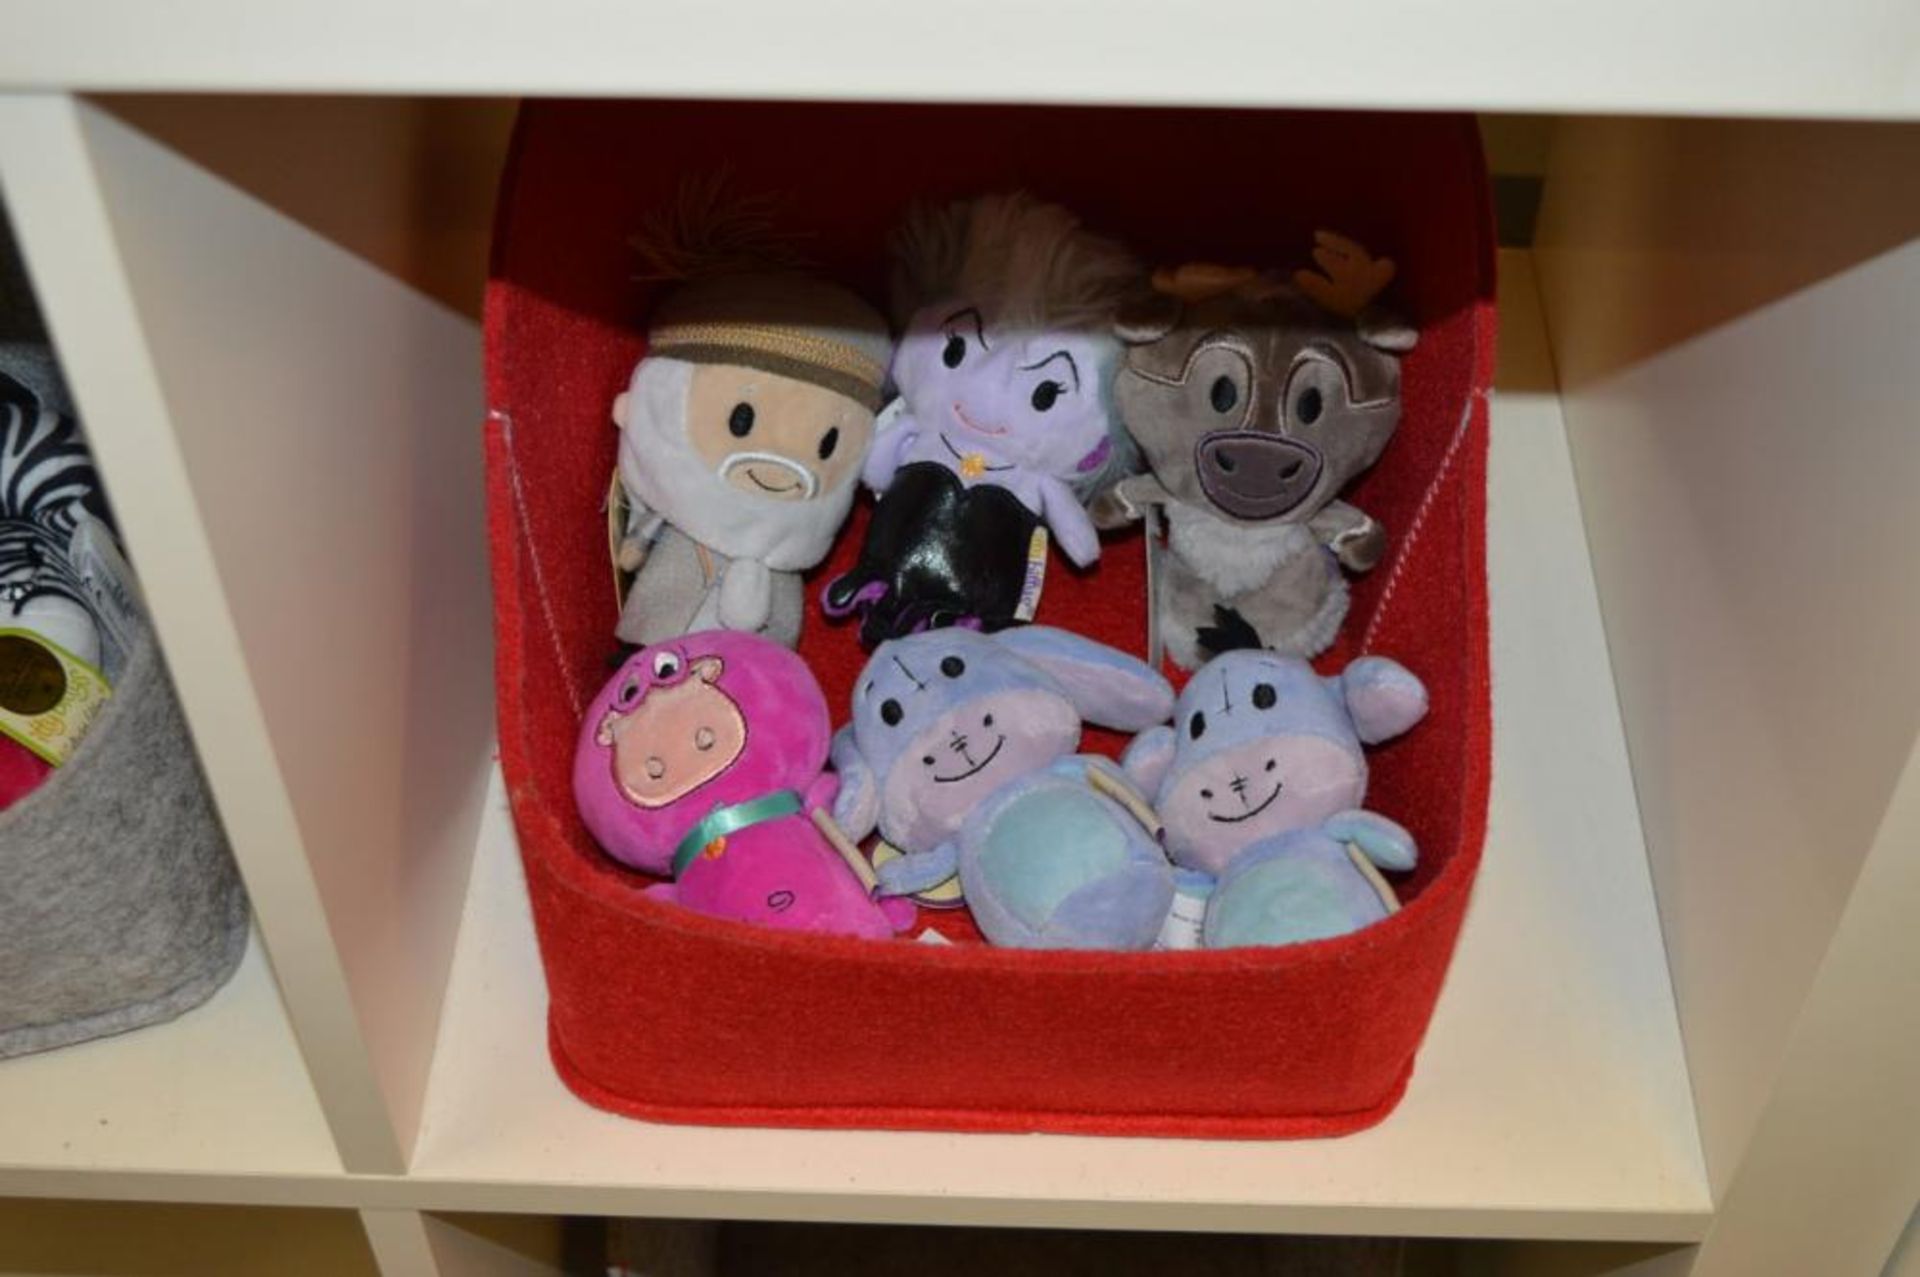 Approx 100 x Hallmark Itty Bittsy Character Soft Toys With 18 x Storage Baskets - Ref BB - CL351 - L - Image 14 of 19